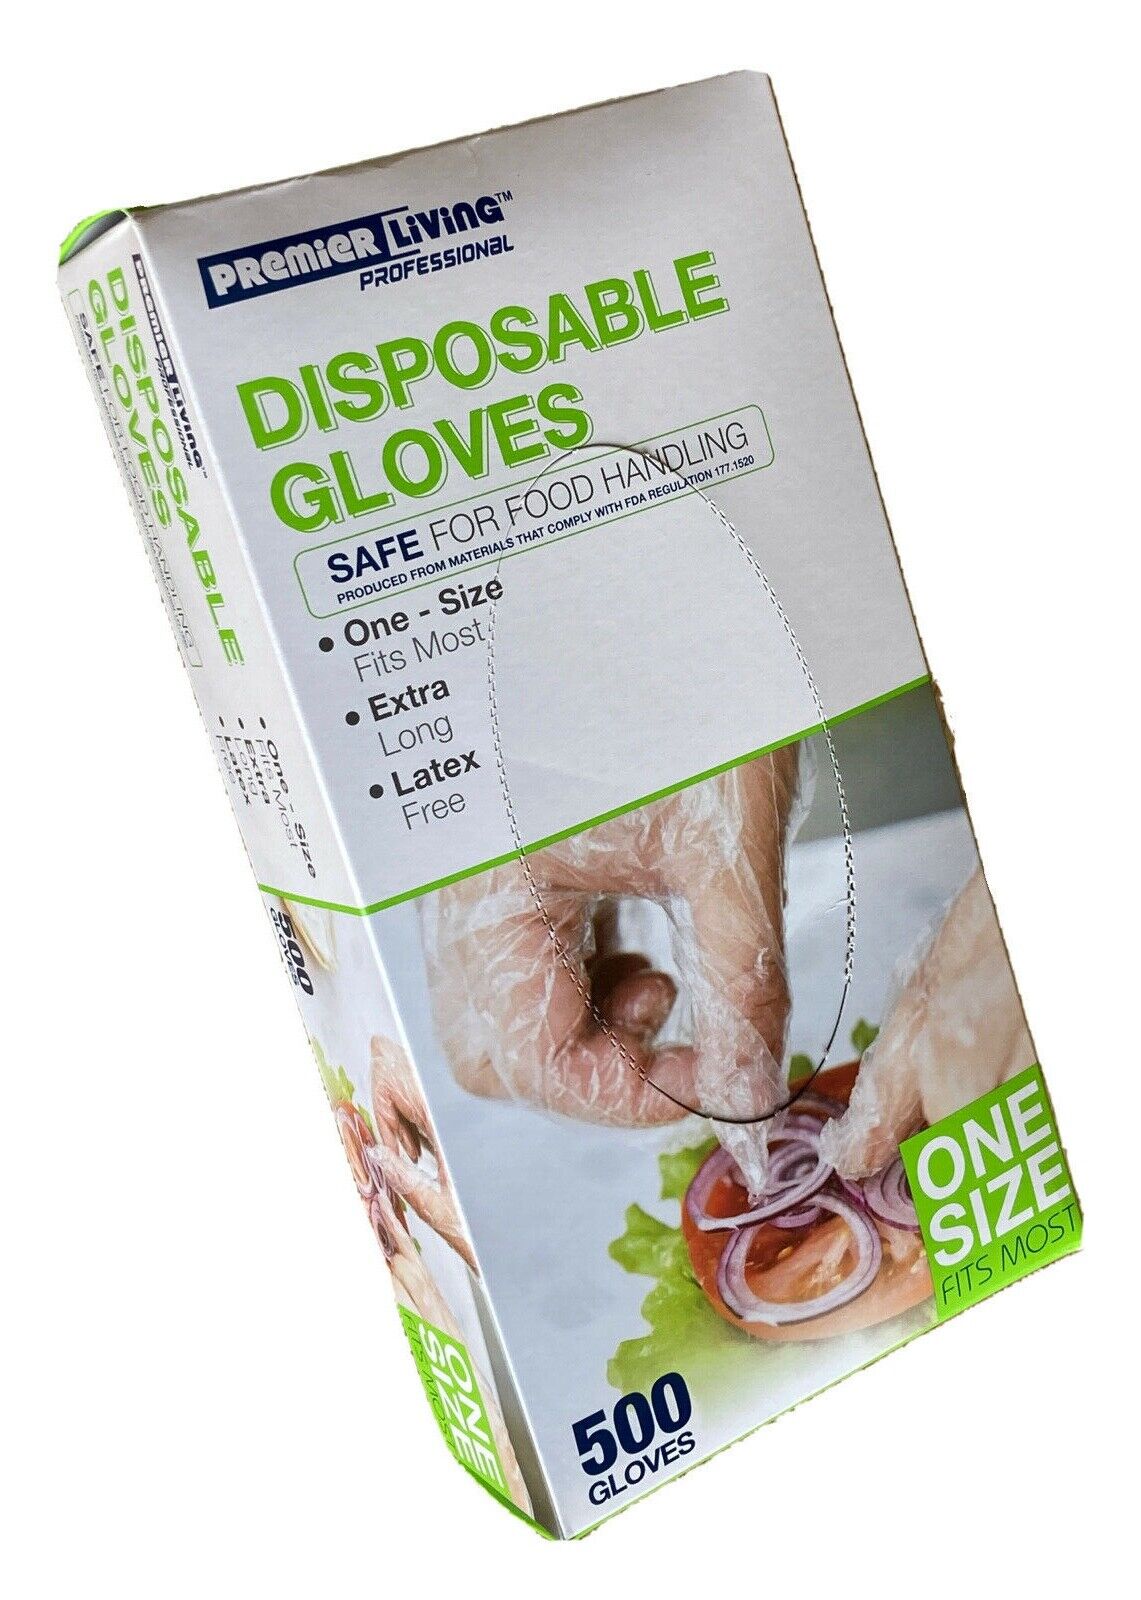 Disposable Gloves 500 Latex Free One Size Premier Living Professional Food Safe